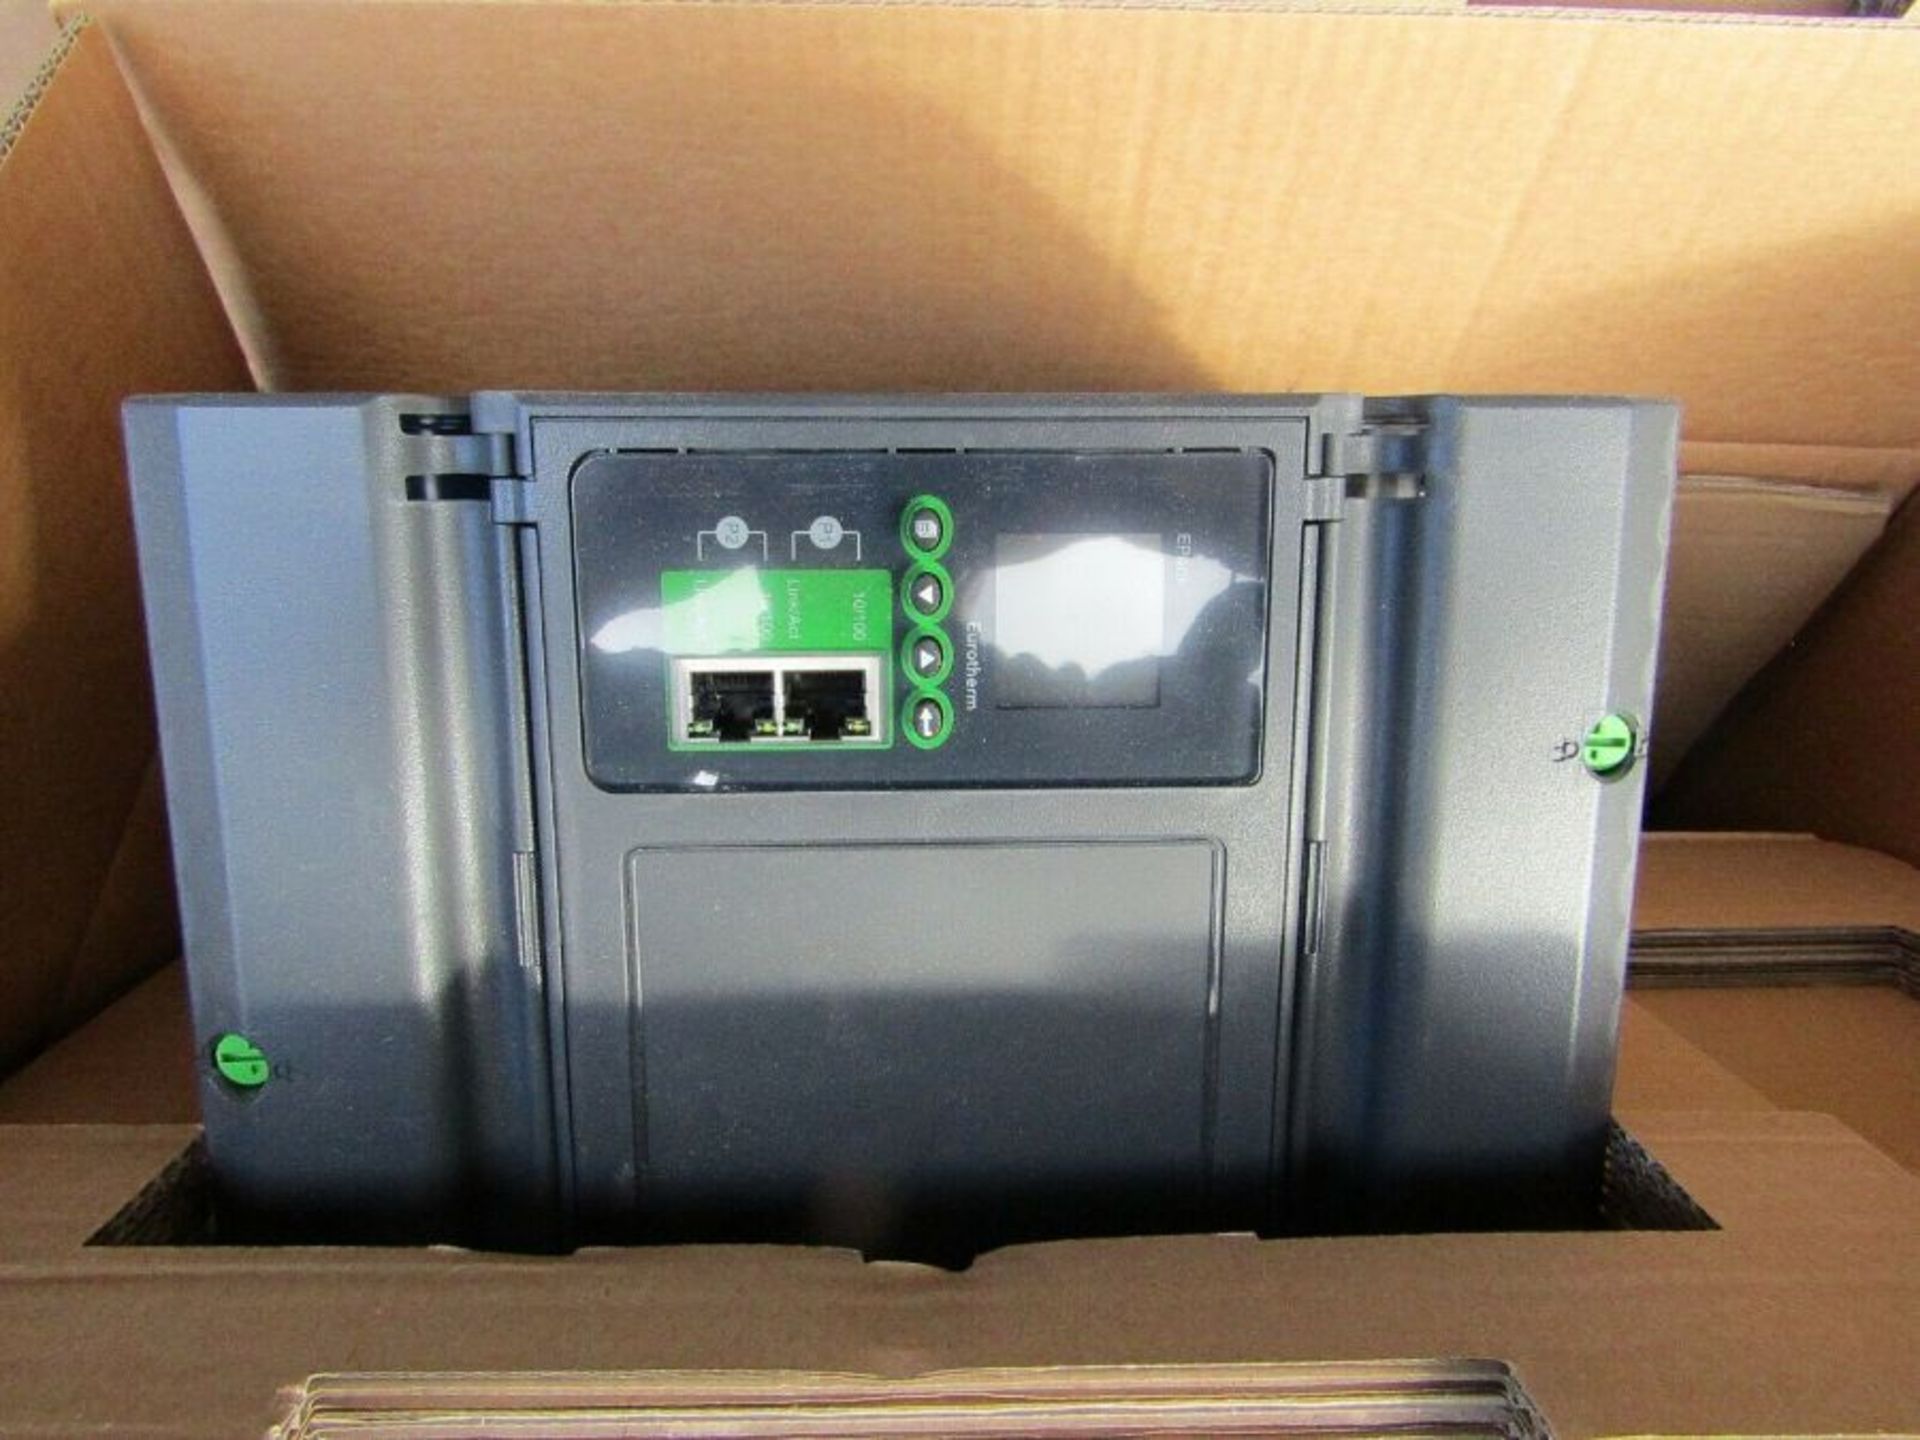 Eurotherm EPACK Power Controller 3 Phase 80A 500V - BL1 1357446 - Image 4 of 6